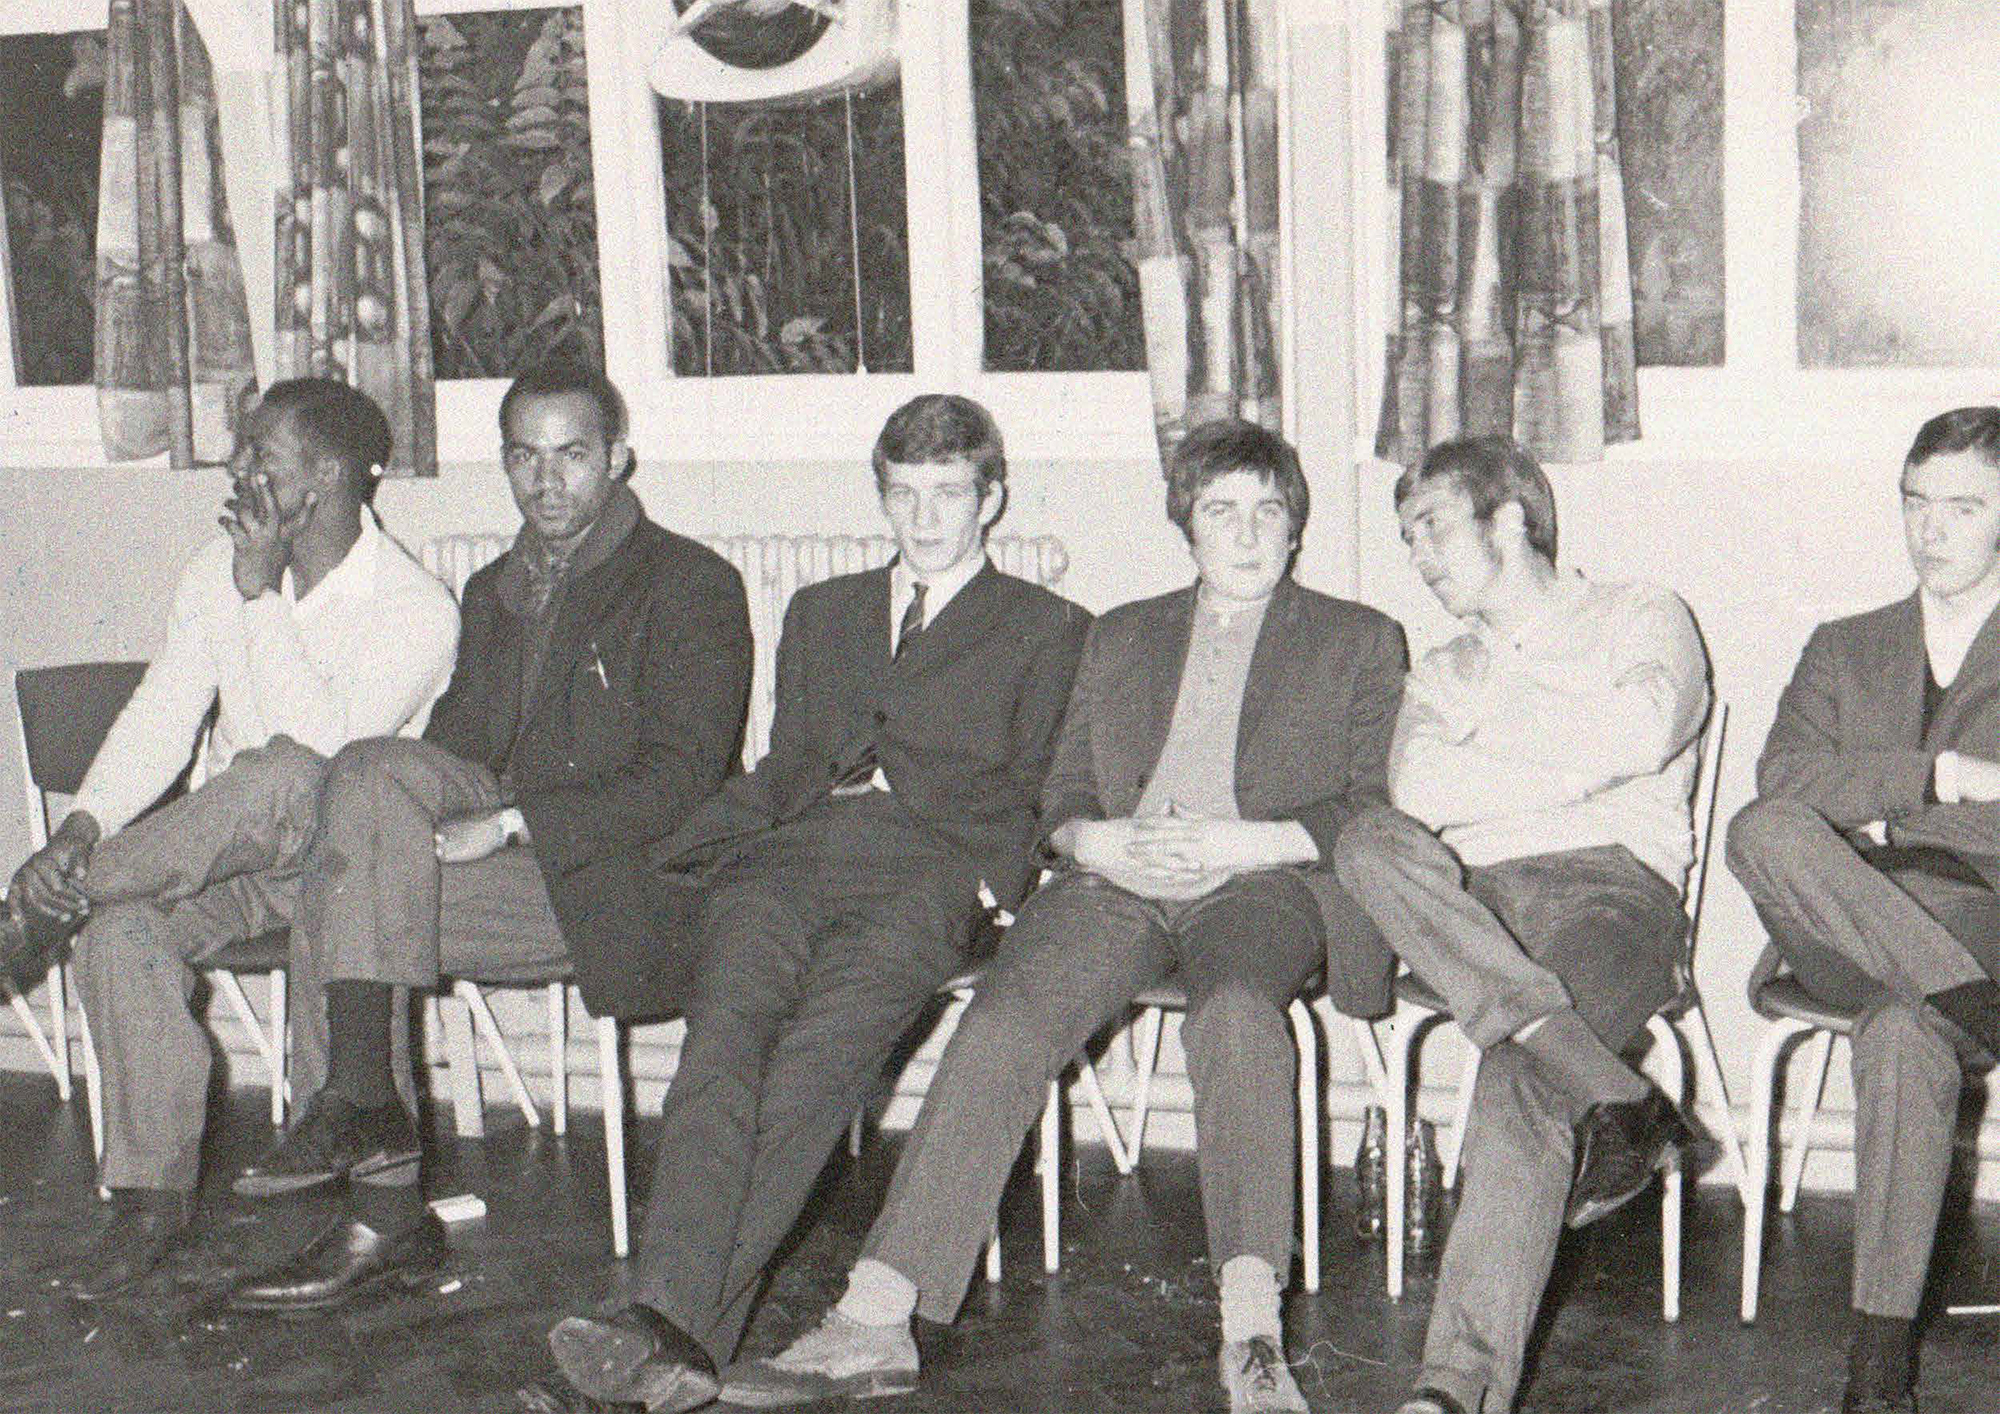 A group of young men sitting on chairs in Foleshill Community Centre's main hall, with heavily patterned curtains and a leaf print on the windows behind them. Some are turned towards the camera and some are chatting with each other.